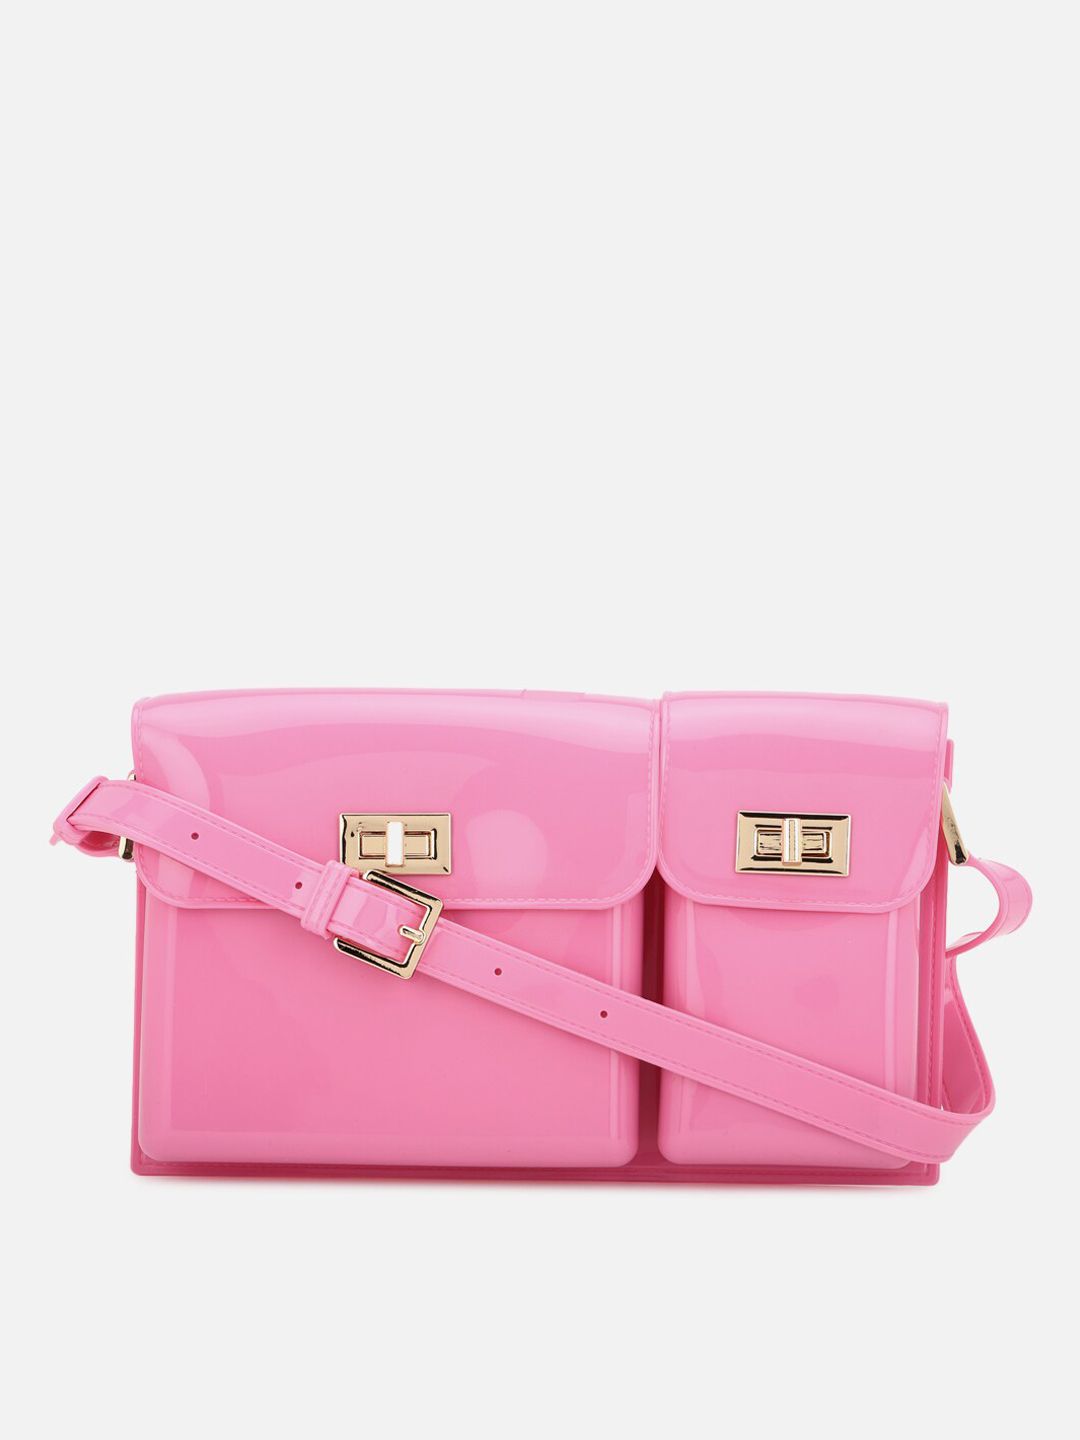 FOREVER 21 Pink PU Structured Sling Bag with Bow Detail Price in India